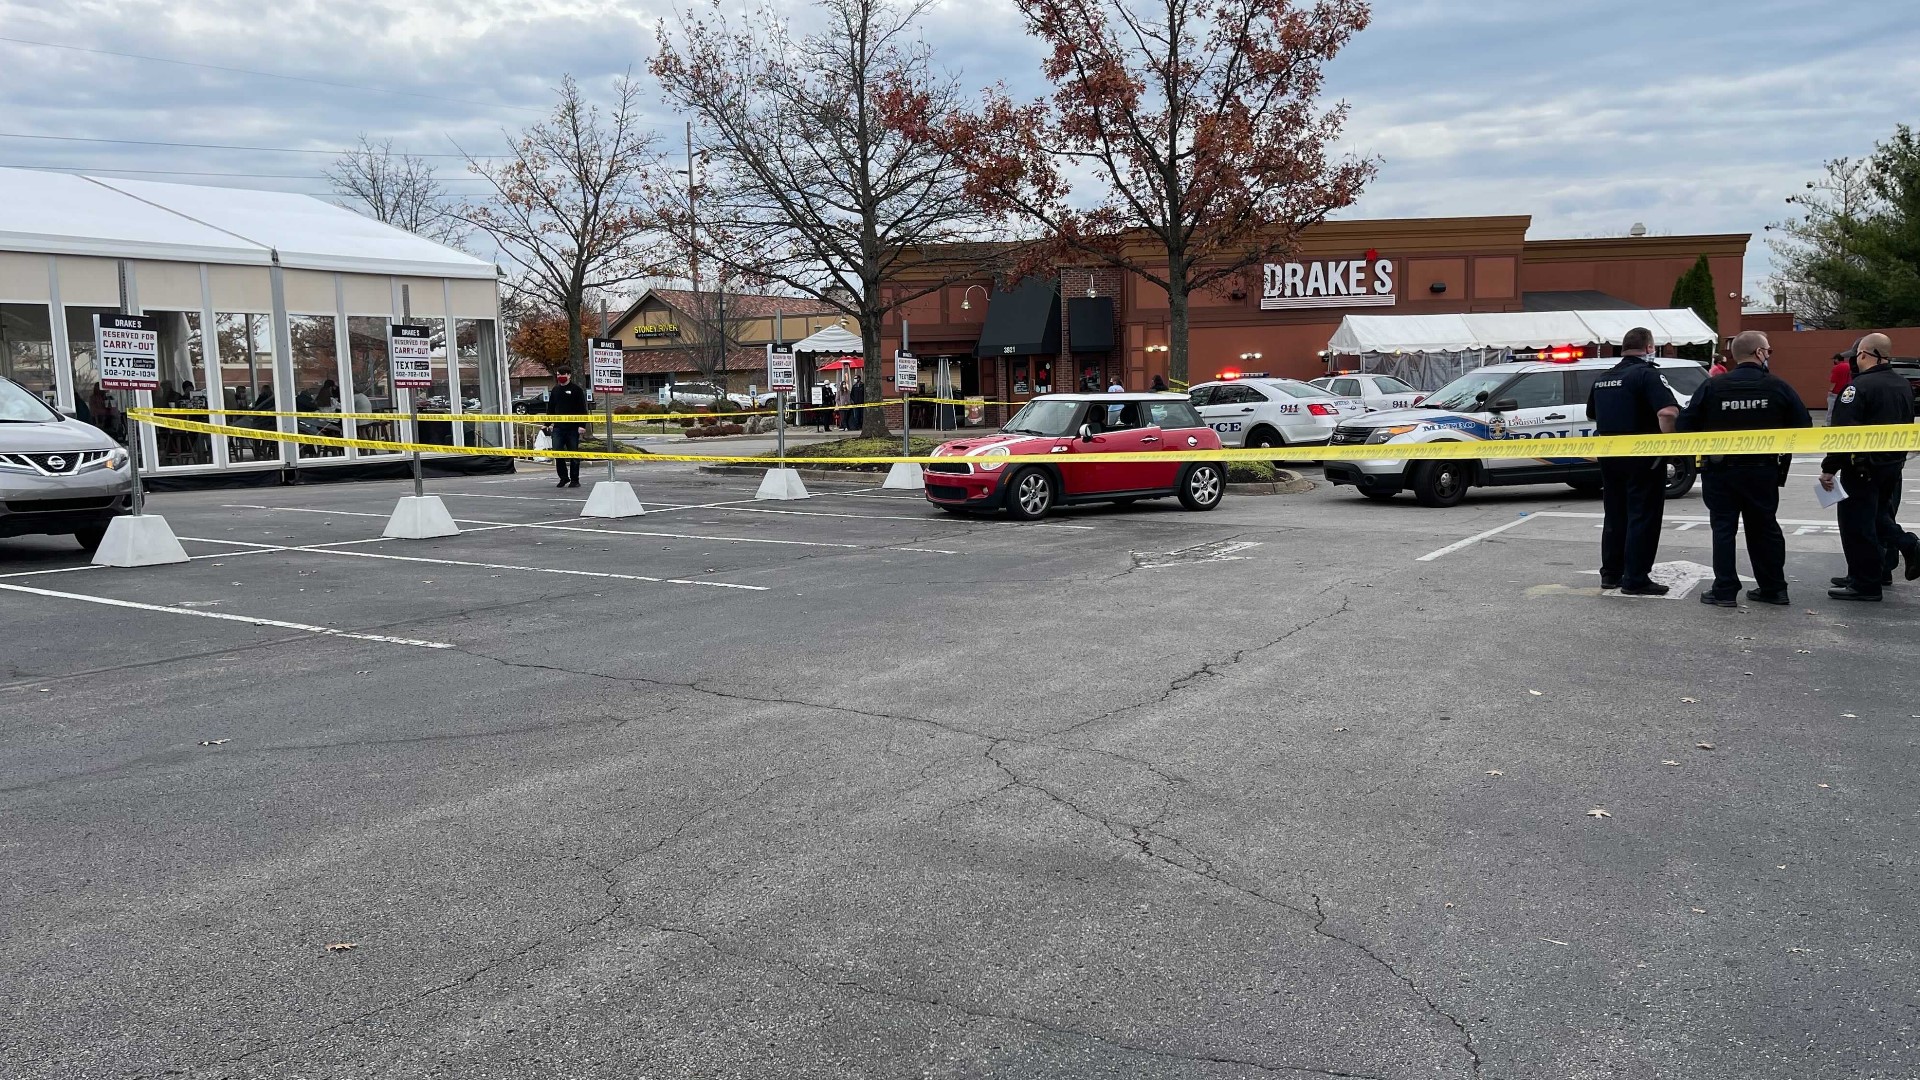 A man has been charged after a shooting near the Paddock Shops in eastern Jefferson County left a victim injured Sunday.